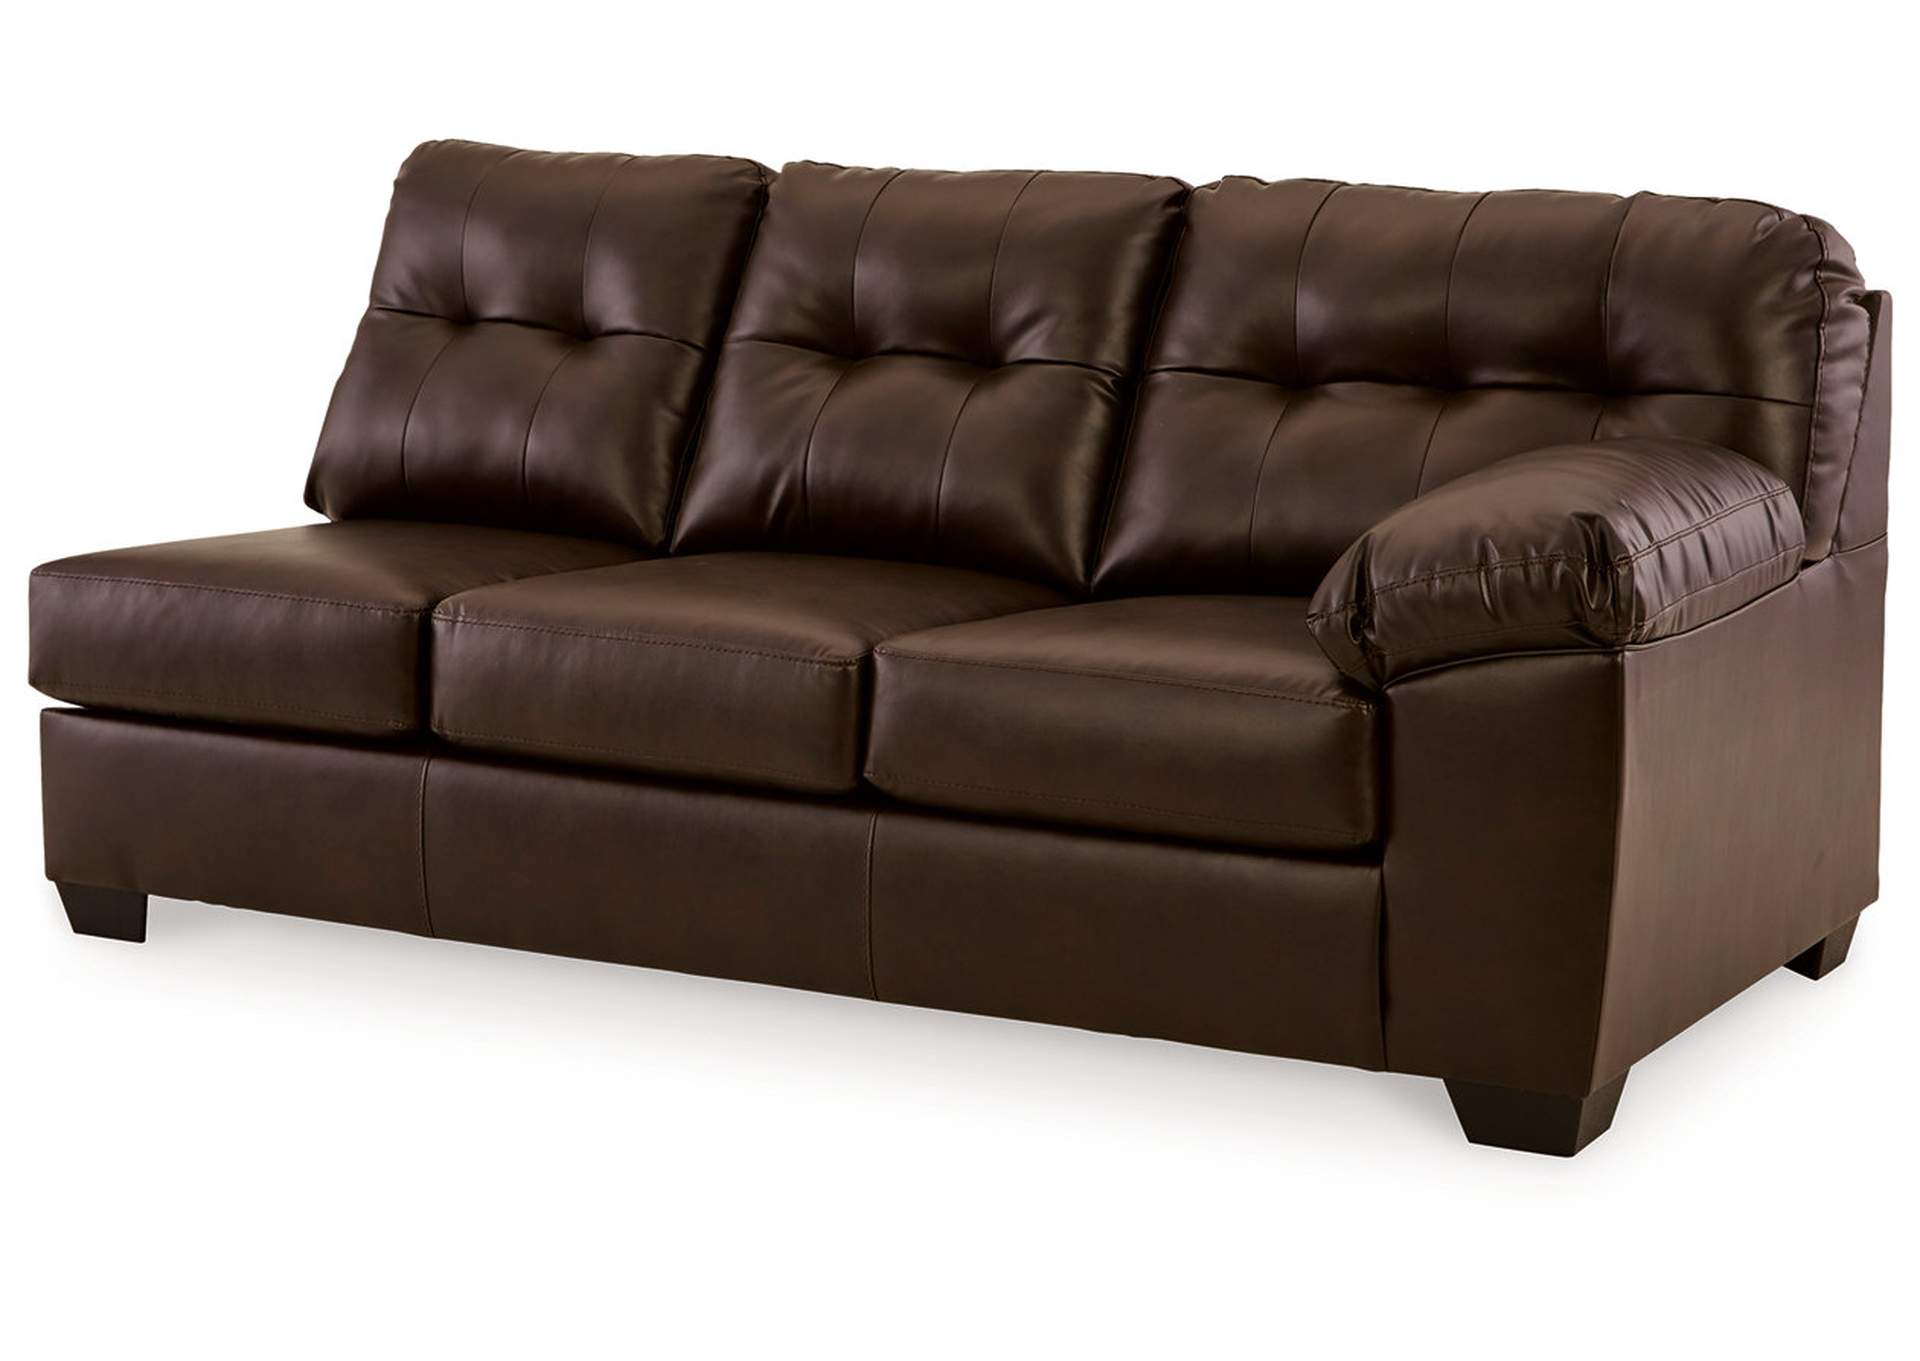 Donlen 2-Piece Sectional with Ottoman,Signature Design By Ashley